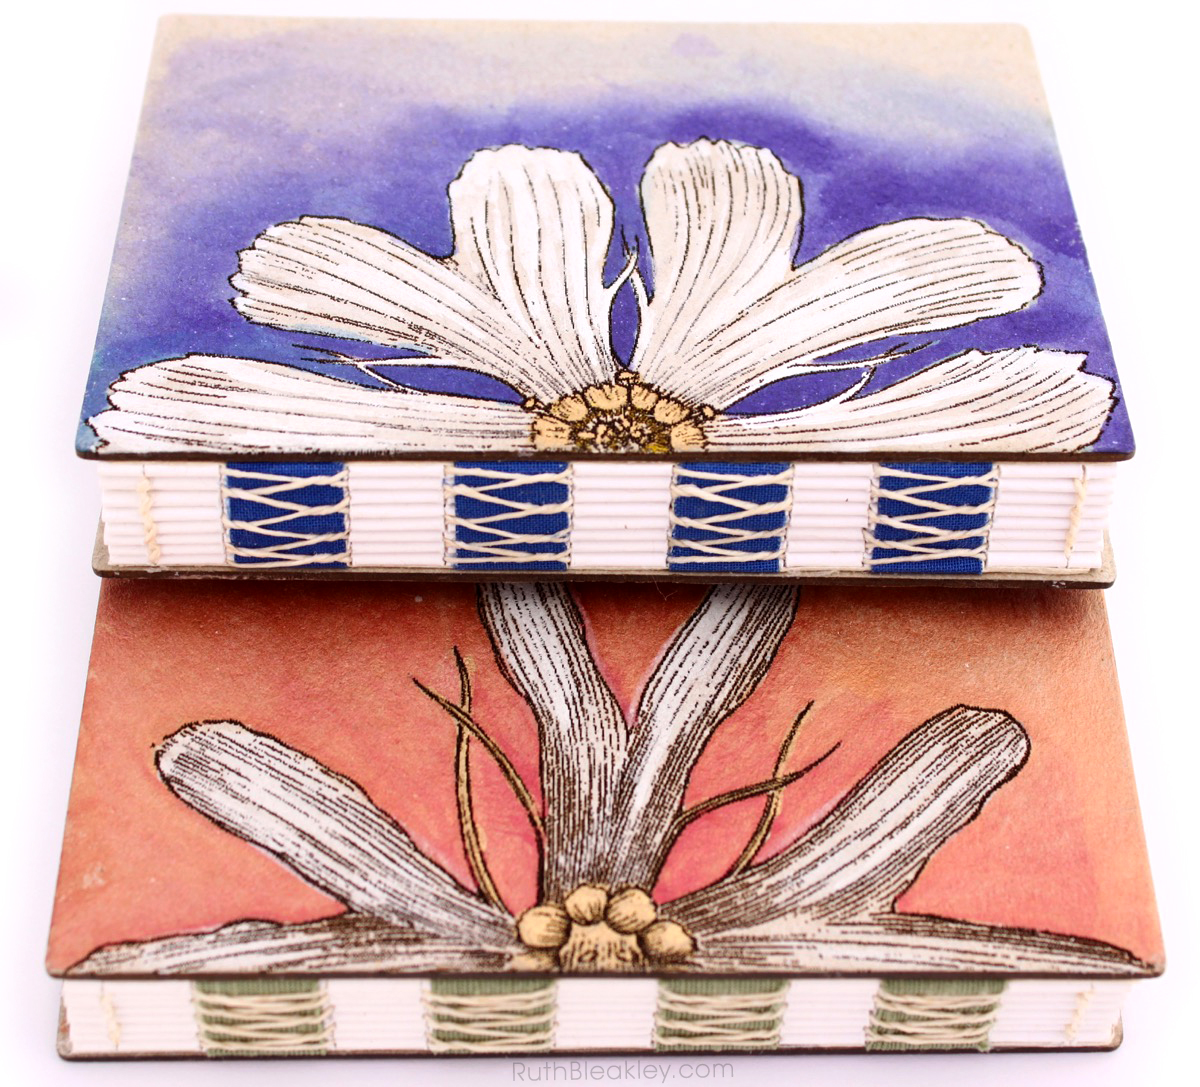 Handpainted Nature Journals sewn with French Link Stitch and engraved with the Glowforge from Book artist Ruth Bleakley - 6